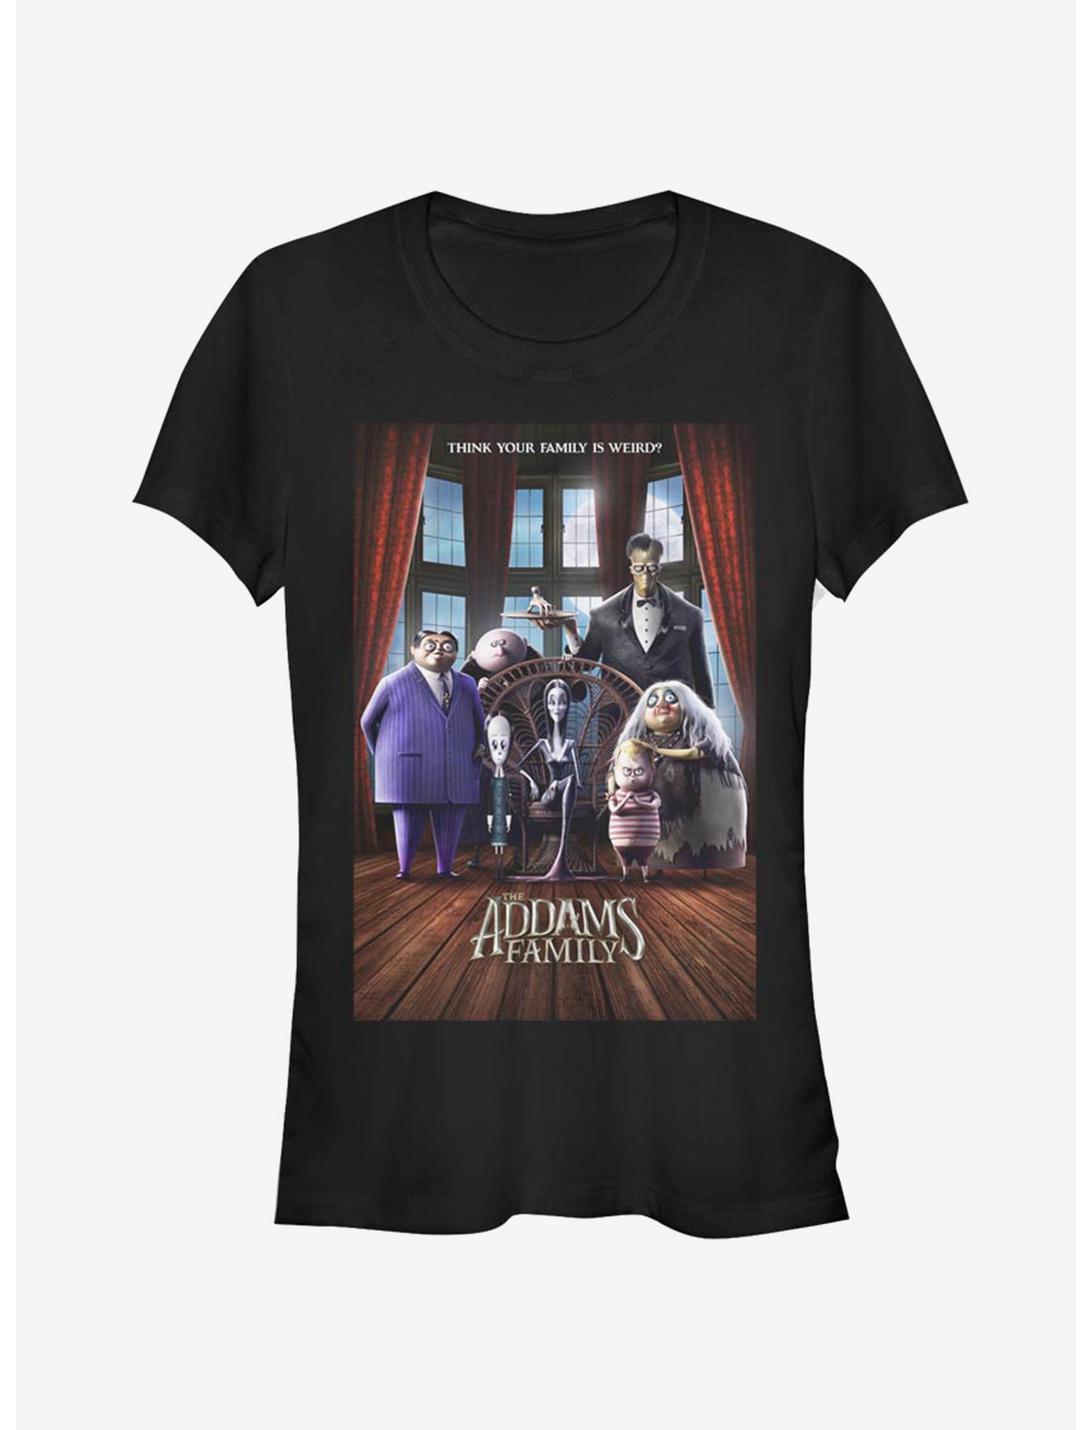 The Addams Family Theatrical Poster Girls T-Shirt, BLACK, hi-res